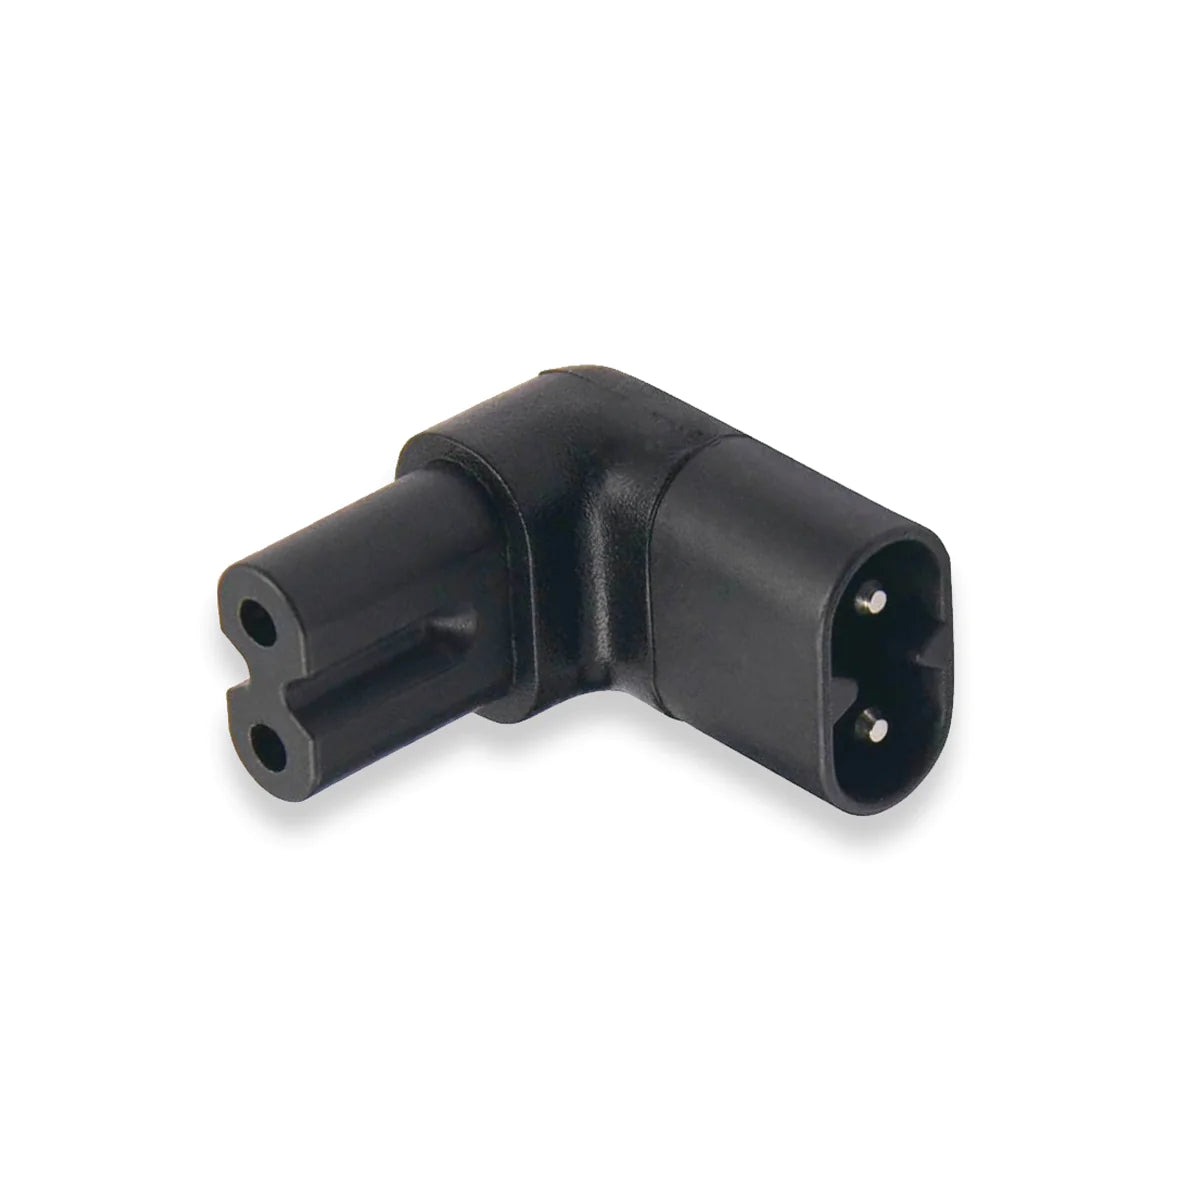 C7 to C8 Angle Adapter